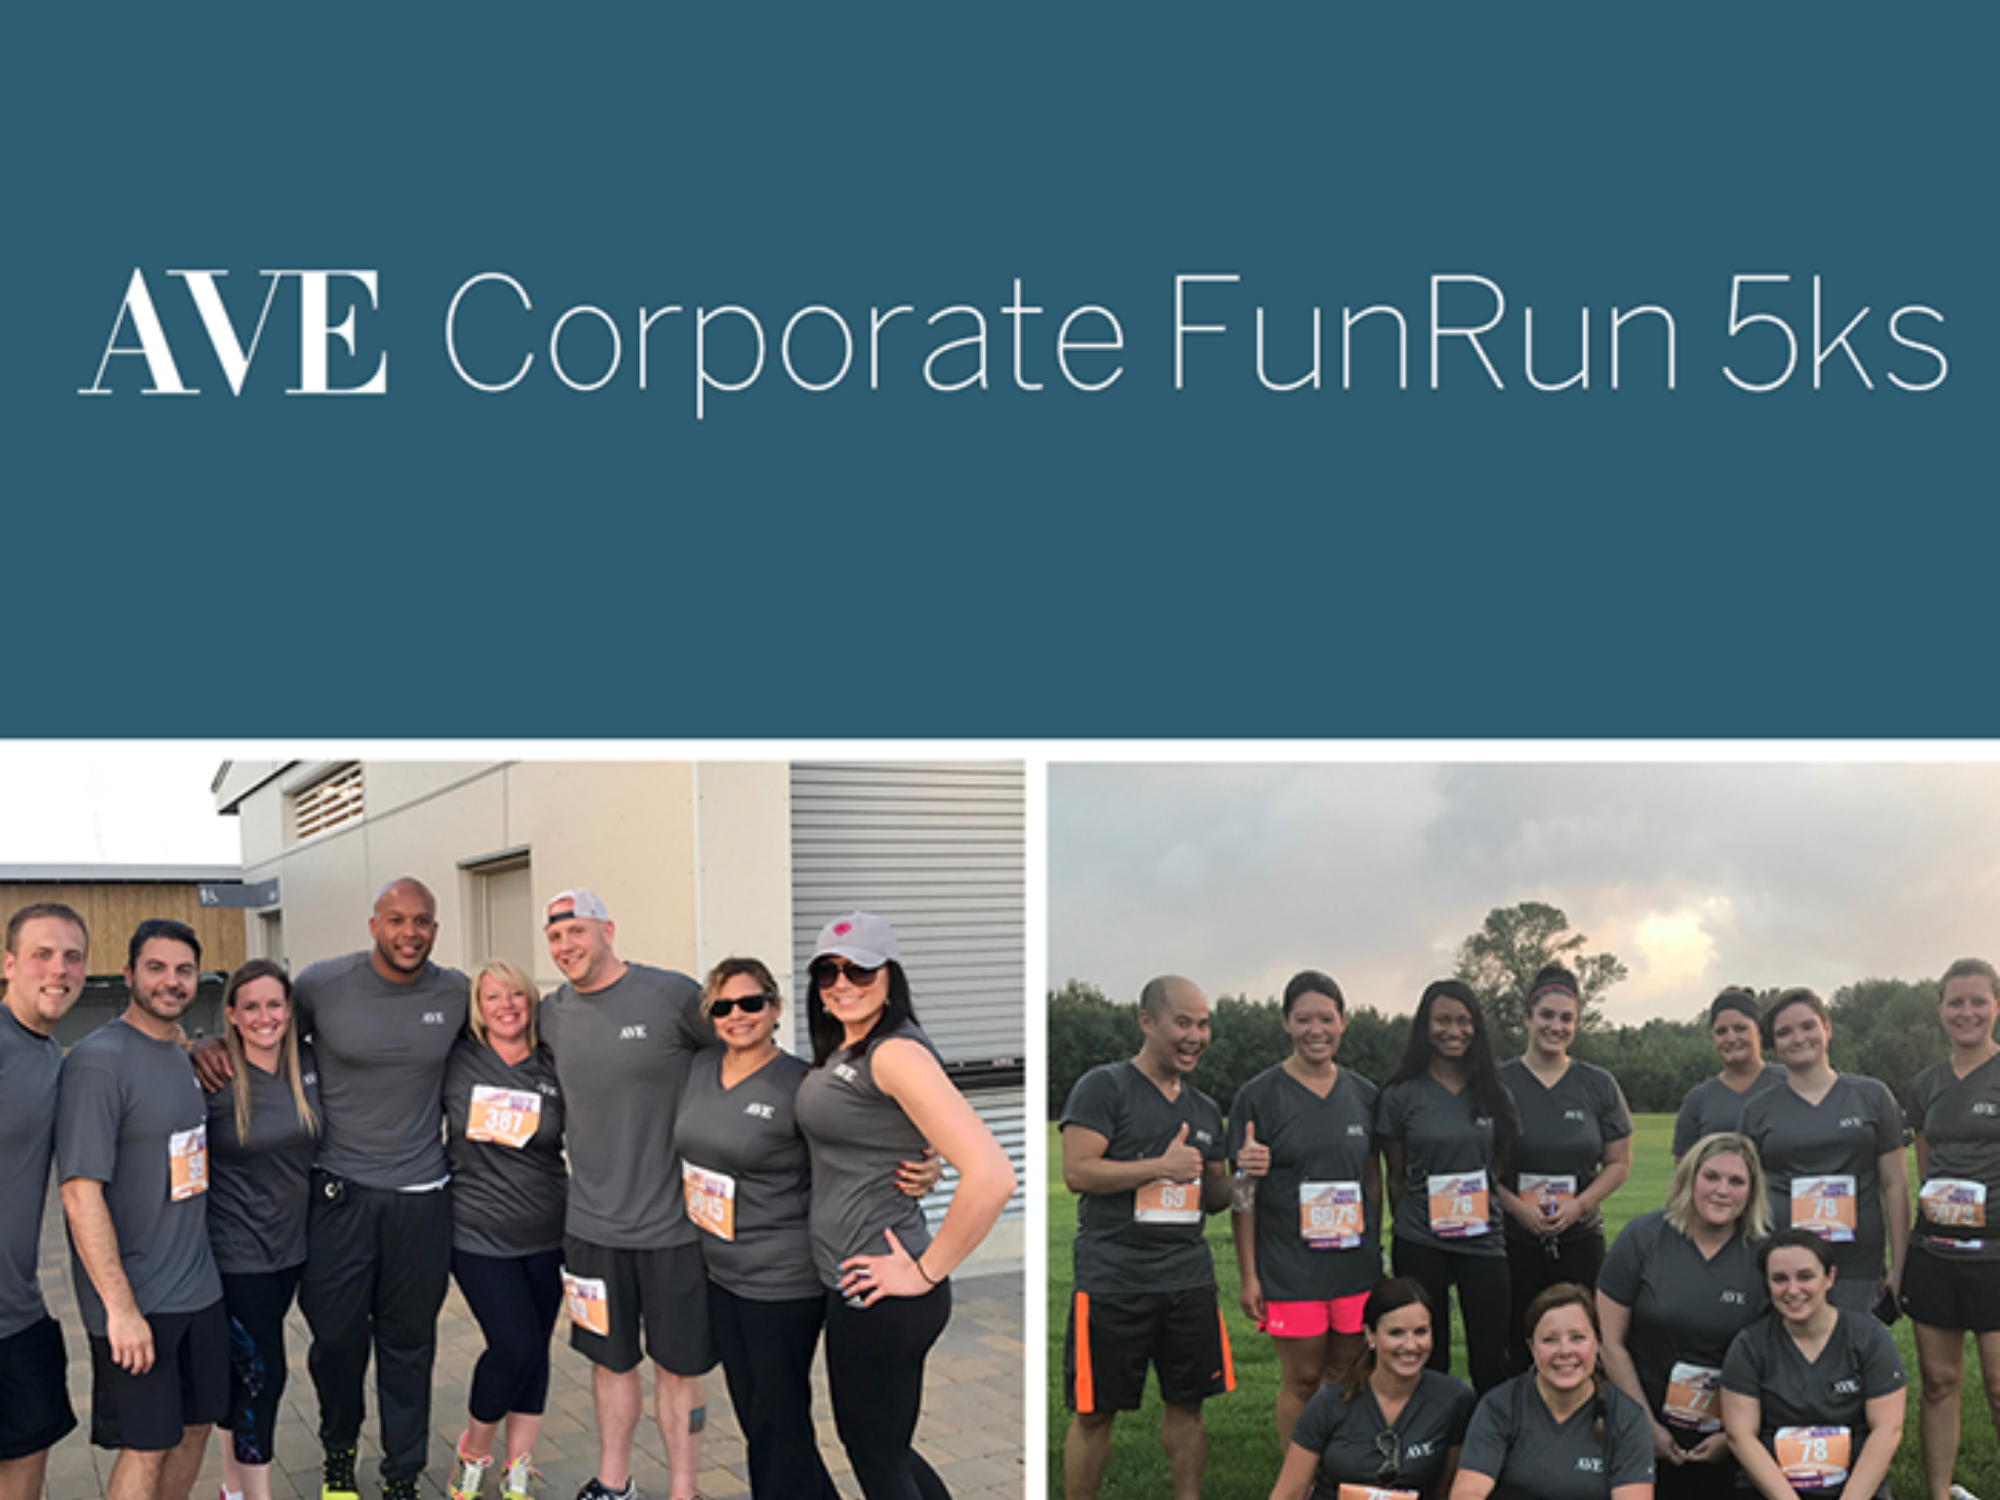 AVE TEAM MEMBERS RAISE FUNDS FOR PEDIATRIC, BLOOD CANCER RESEARCH, TREATMEN